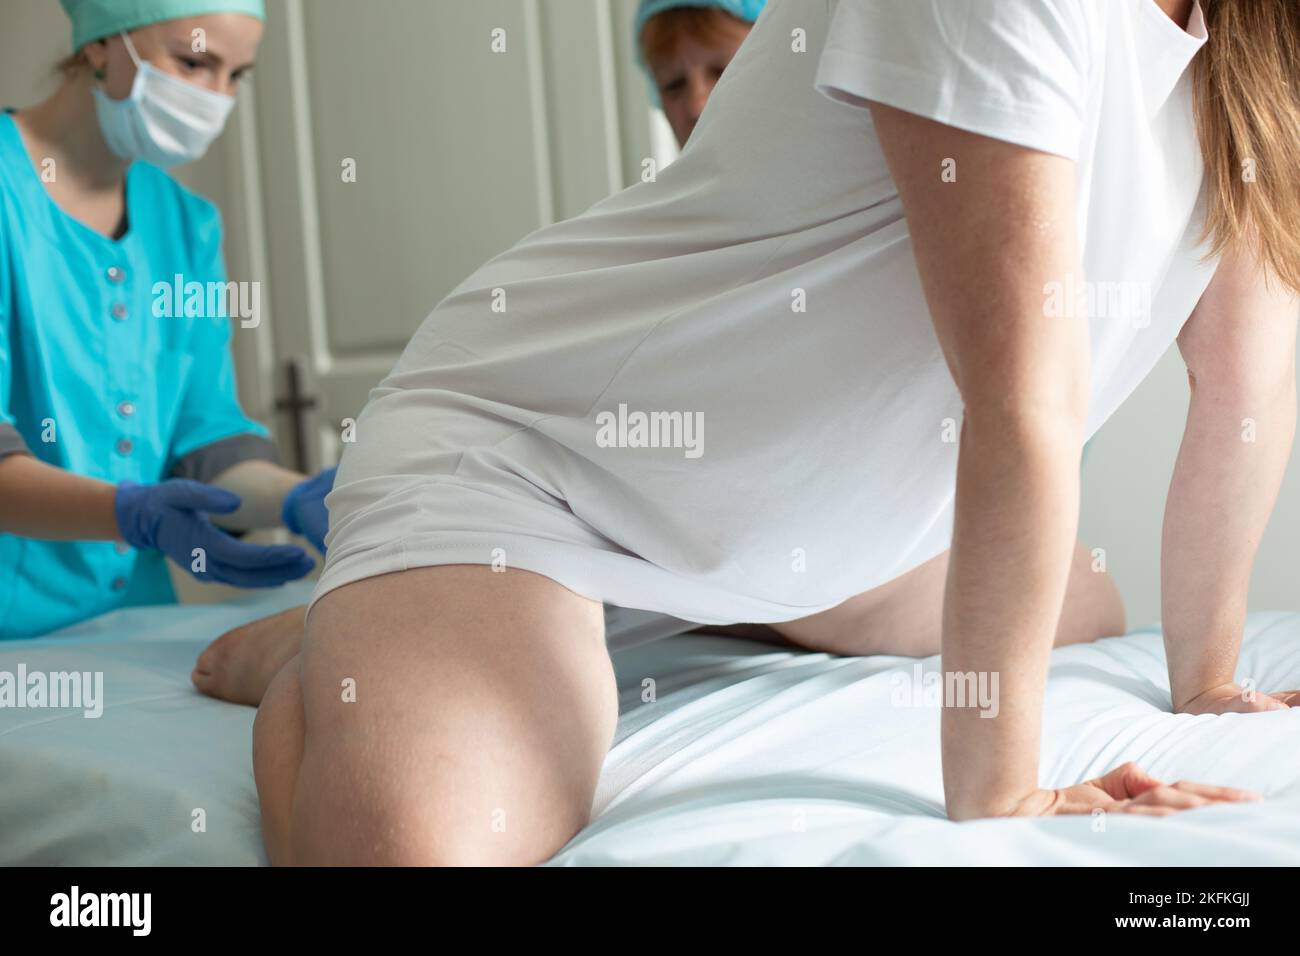 Child birth process, helping personal during labour Stock Photo